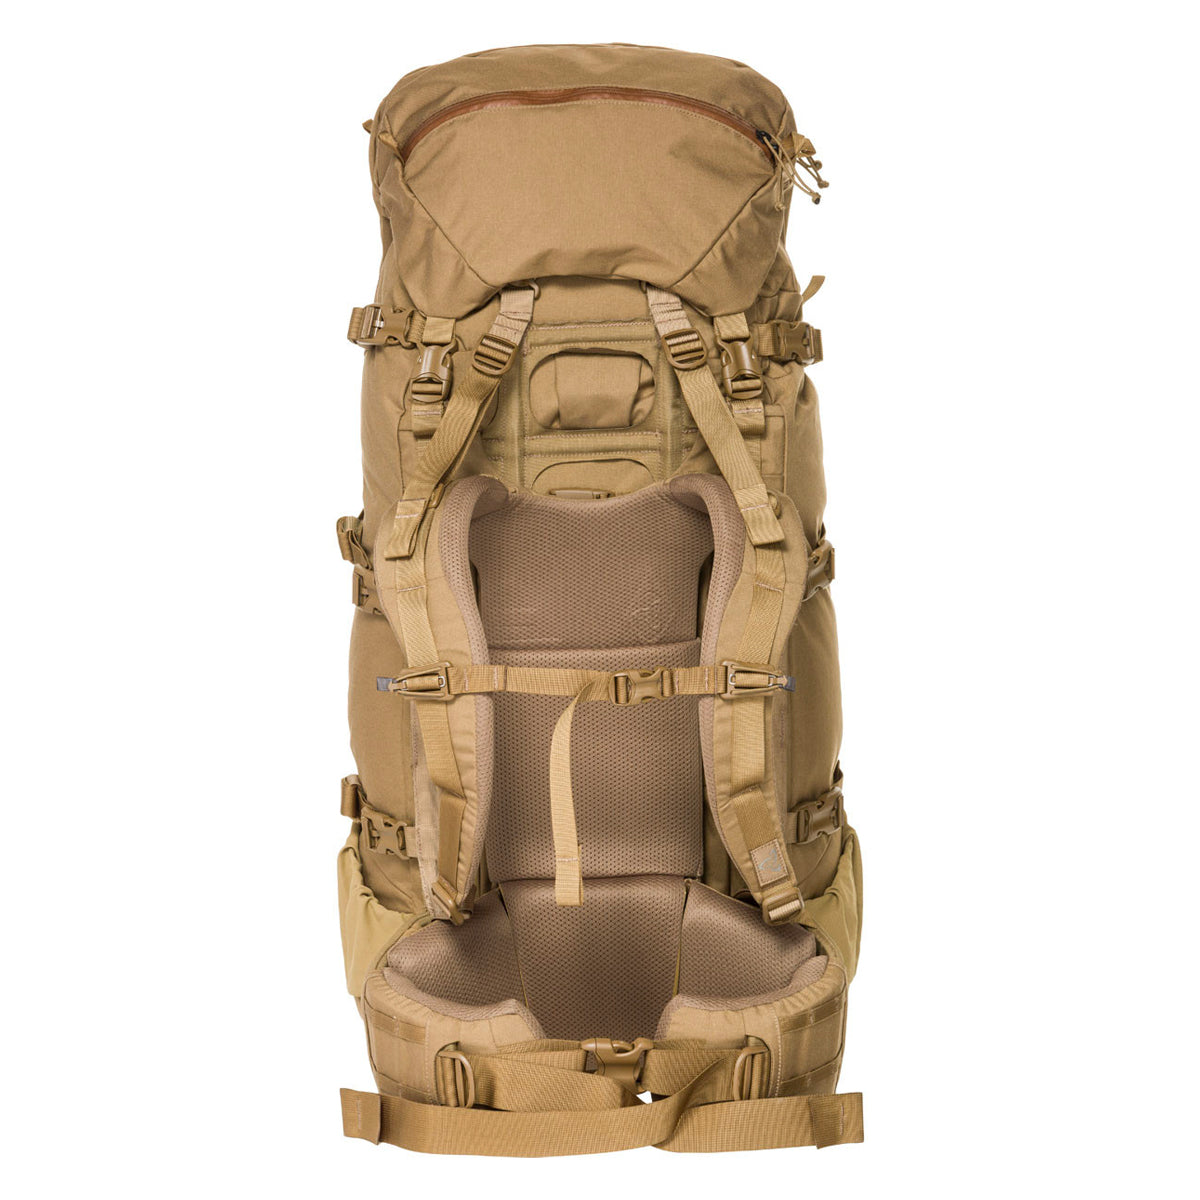 Mystery Ranch Beartooth 80 Backpack in Mystery Ranch Beartooth 80 Backpack by Mystery Ranch | Gear - goHUNT Shop by GOHUNT | Mystery Ranch - GOHUNT Shop